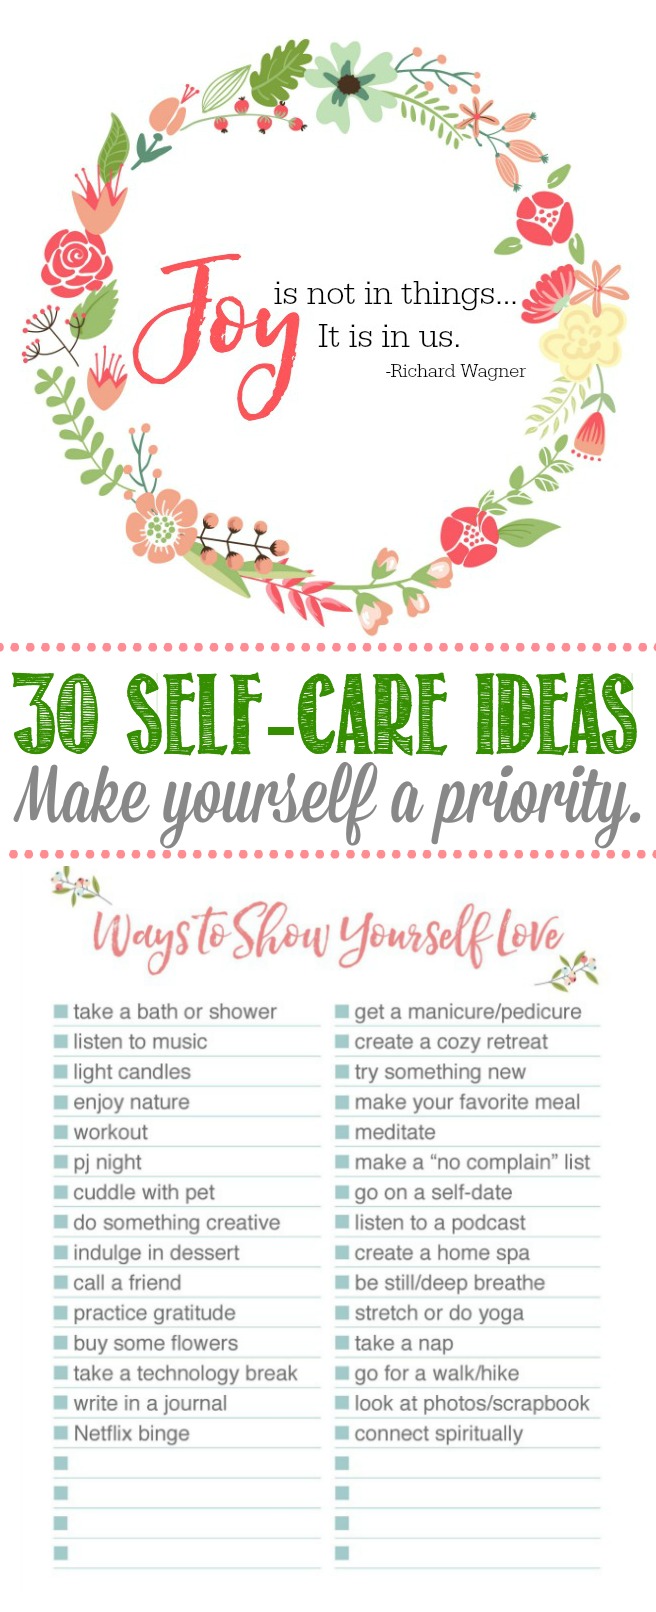 I practice self-care 11 simple ways every day, and its 